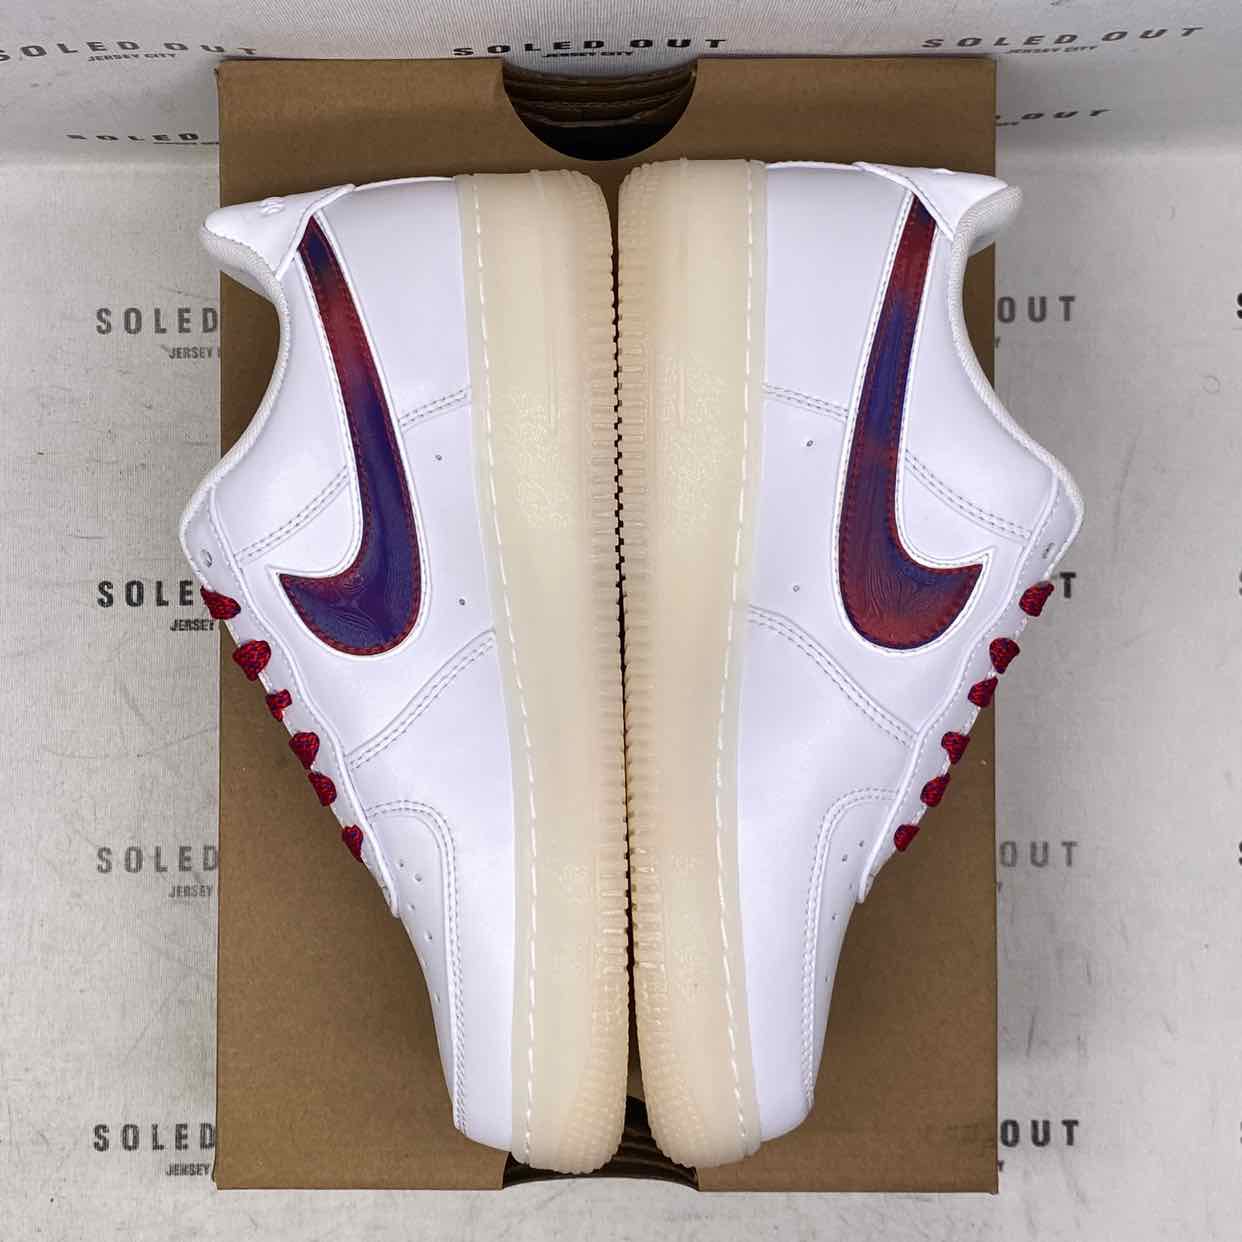 Nike Air Force 1 Low "De Lo Mio" 2018 Used Size 6.5